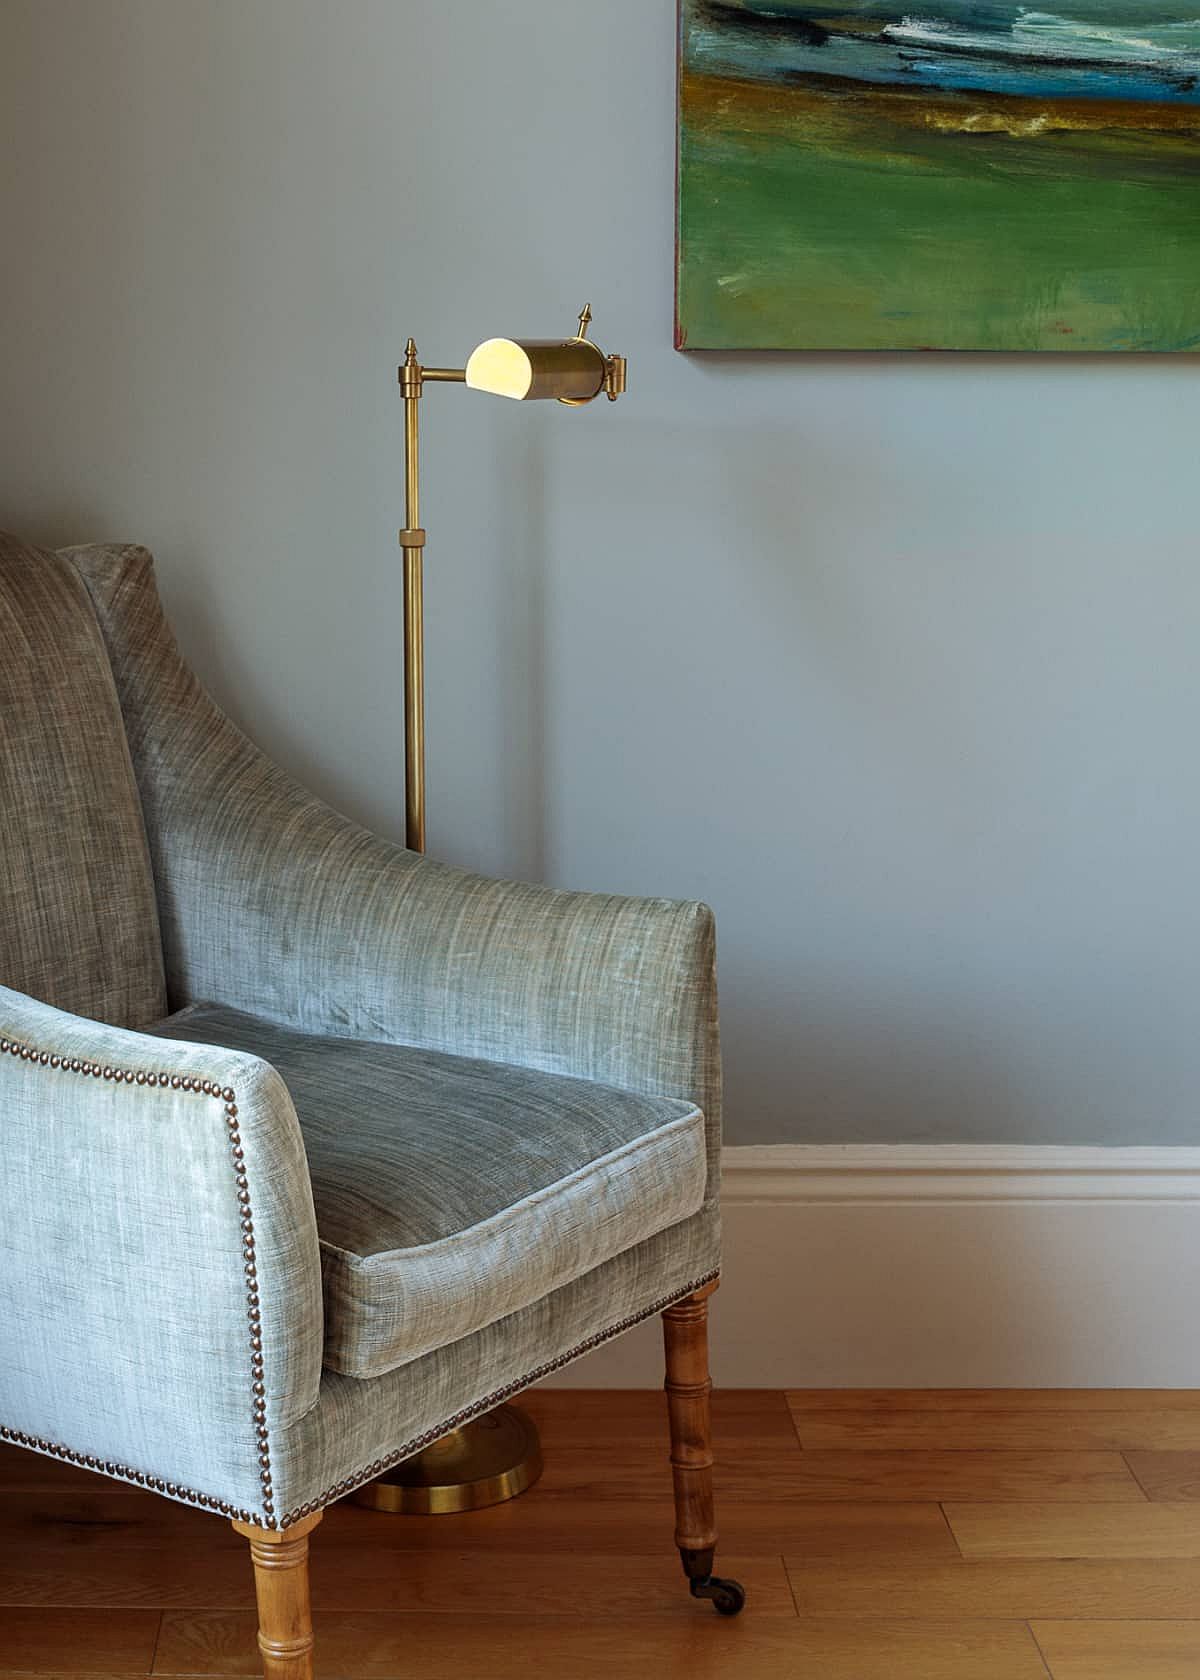 Reading nook with comfy chair and slim floor lamp that brings metallic glitz